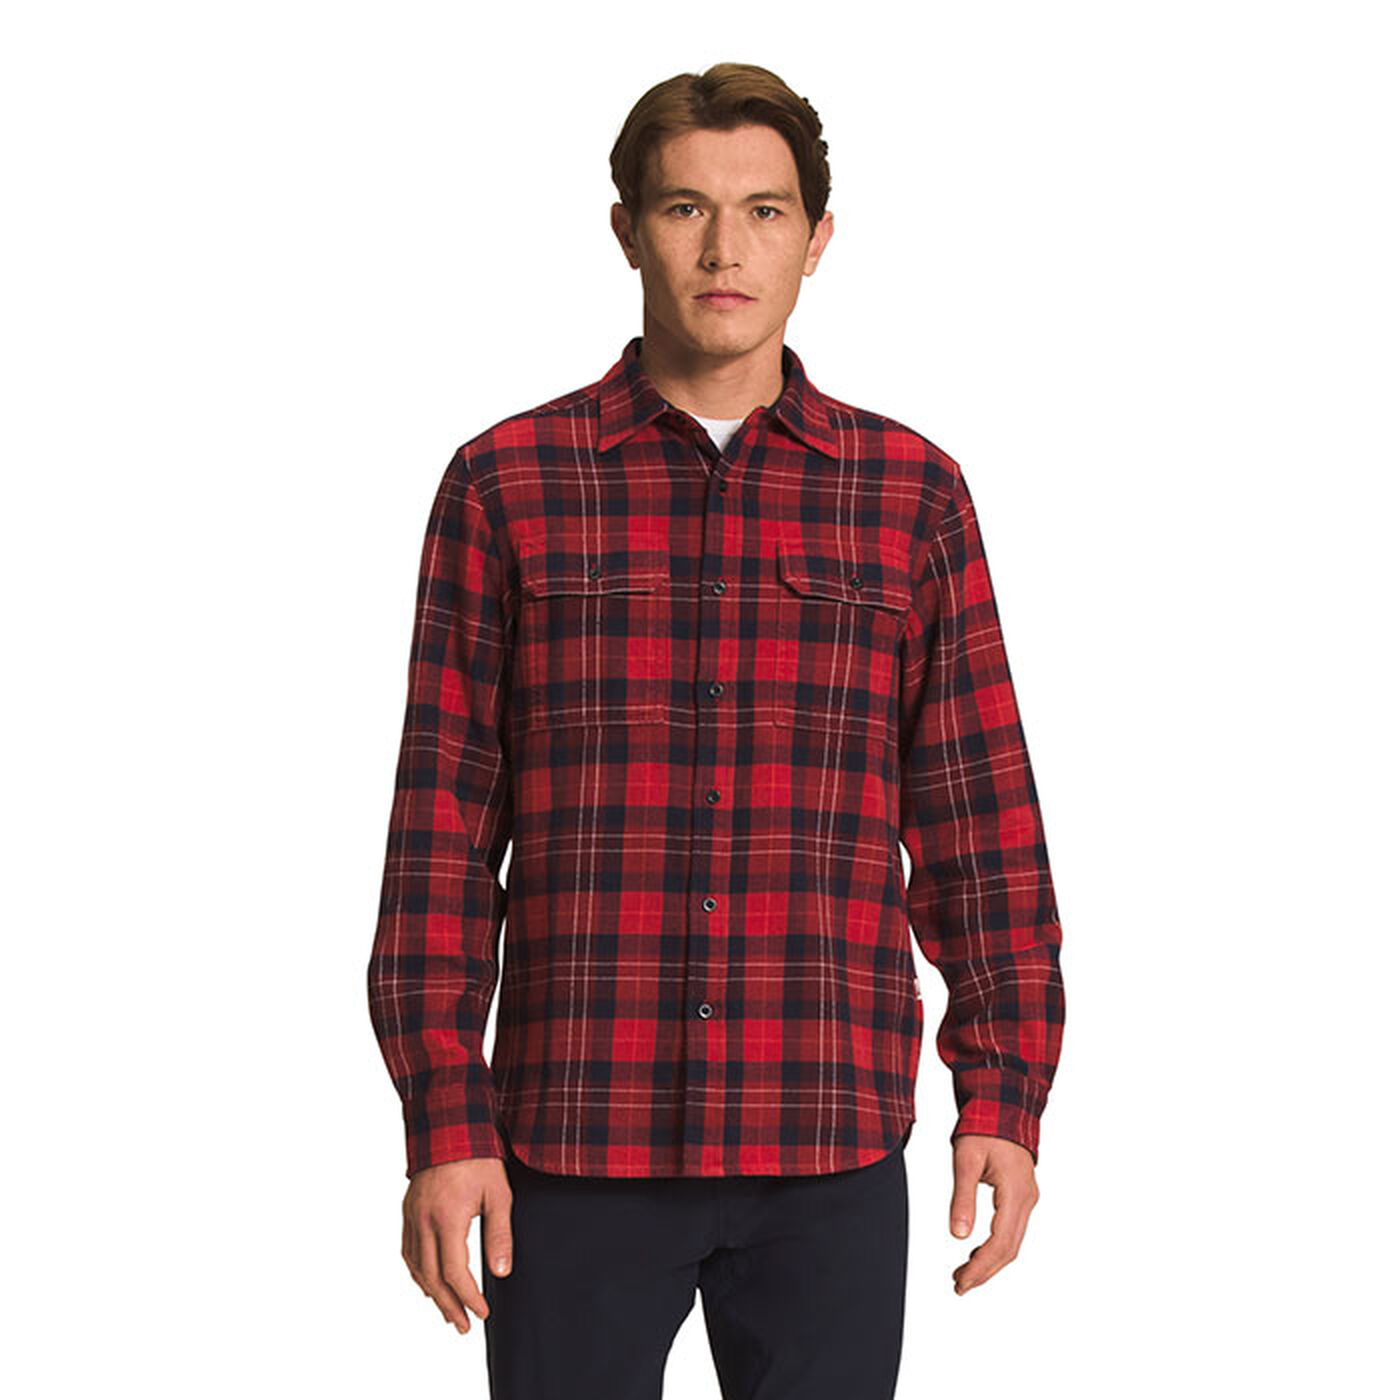 Men's Arroyo Flannel Shirt | The North Face | Sporting Life Online